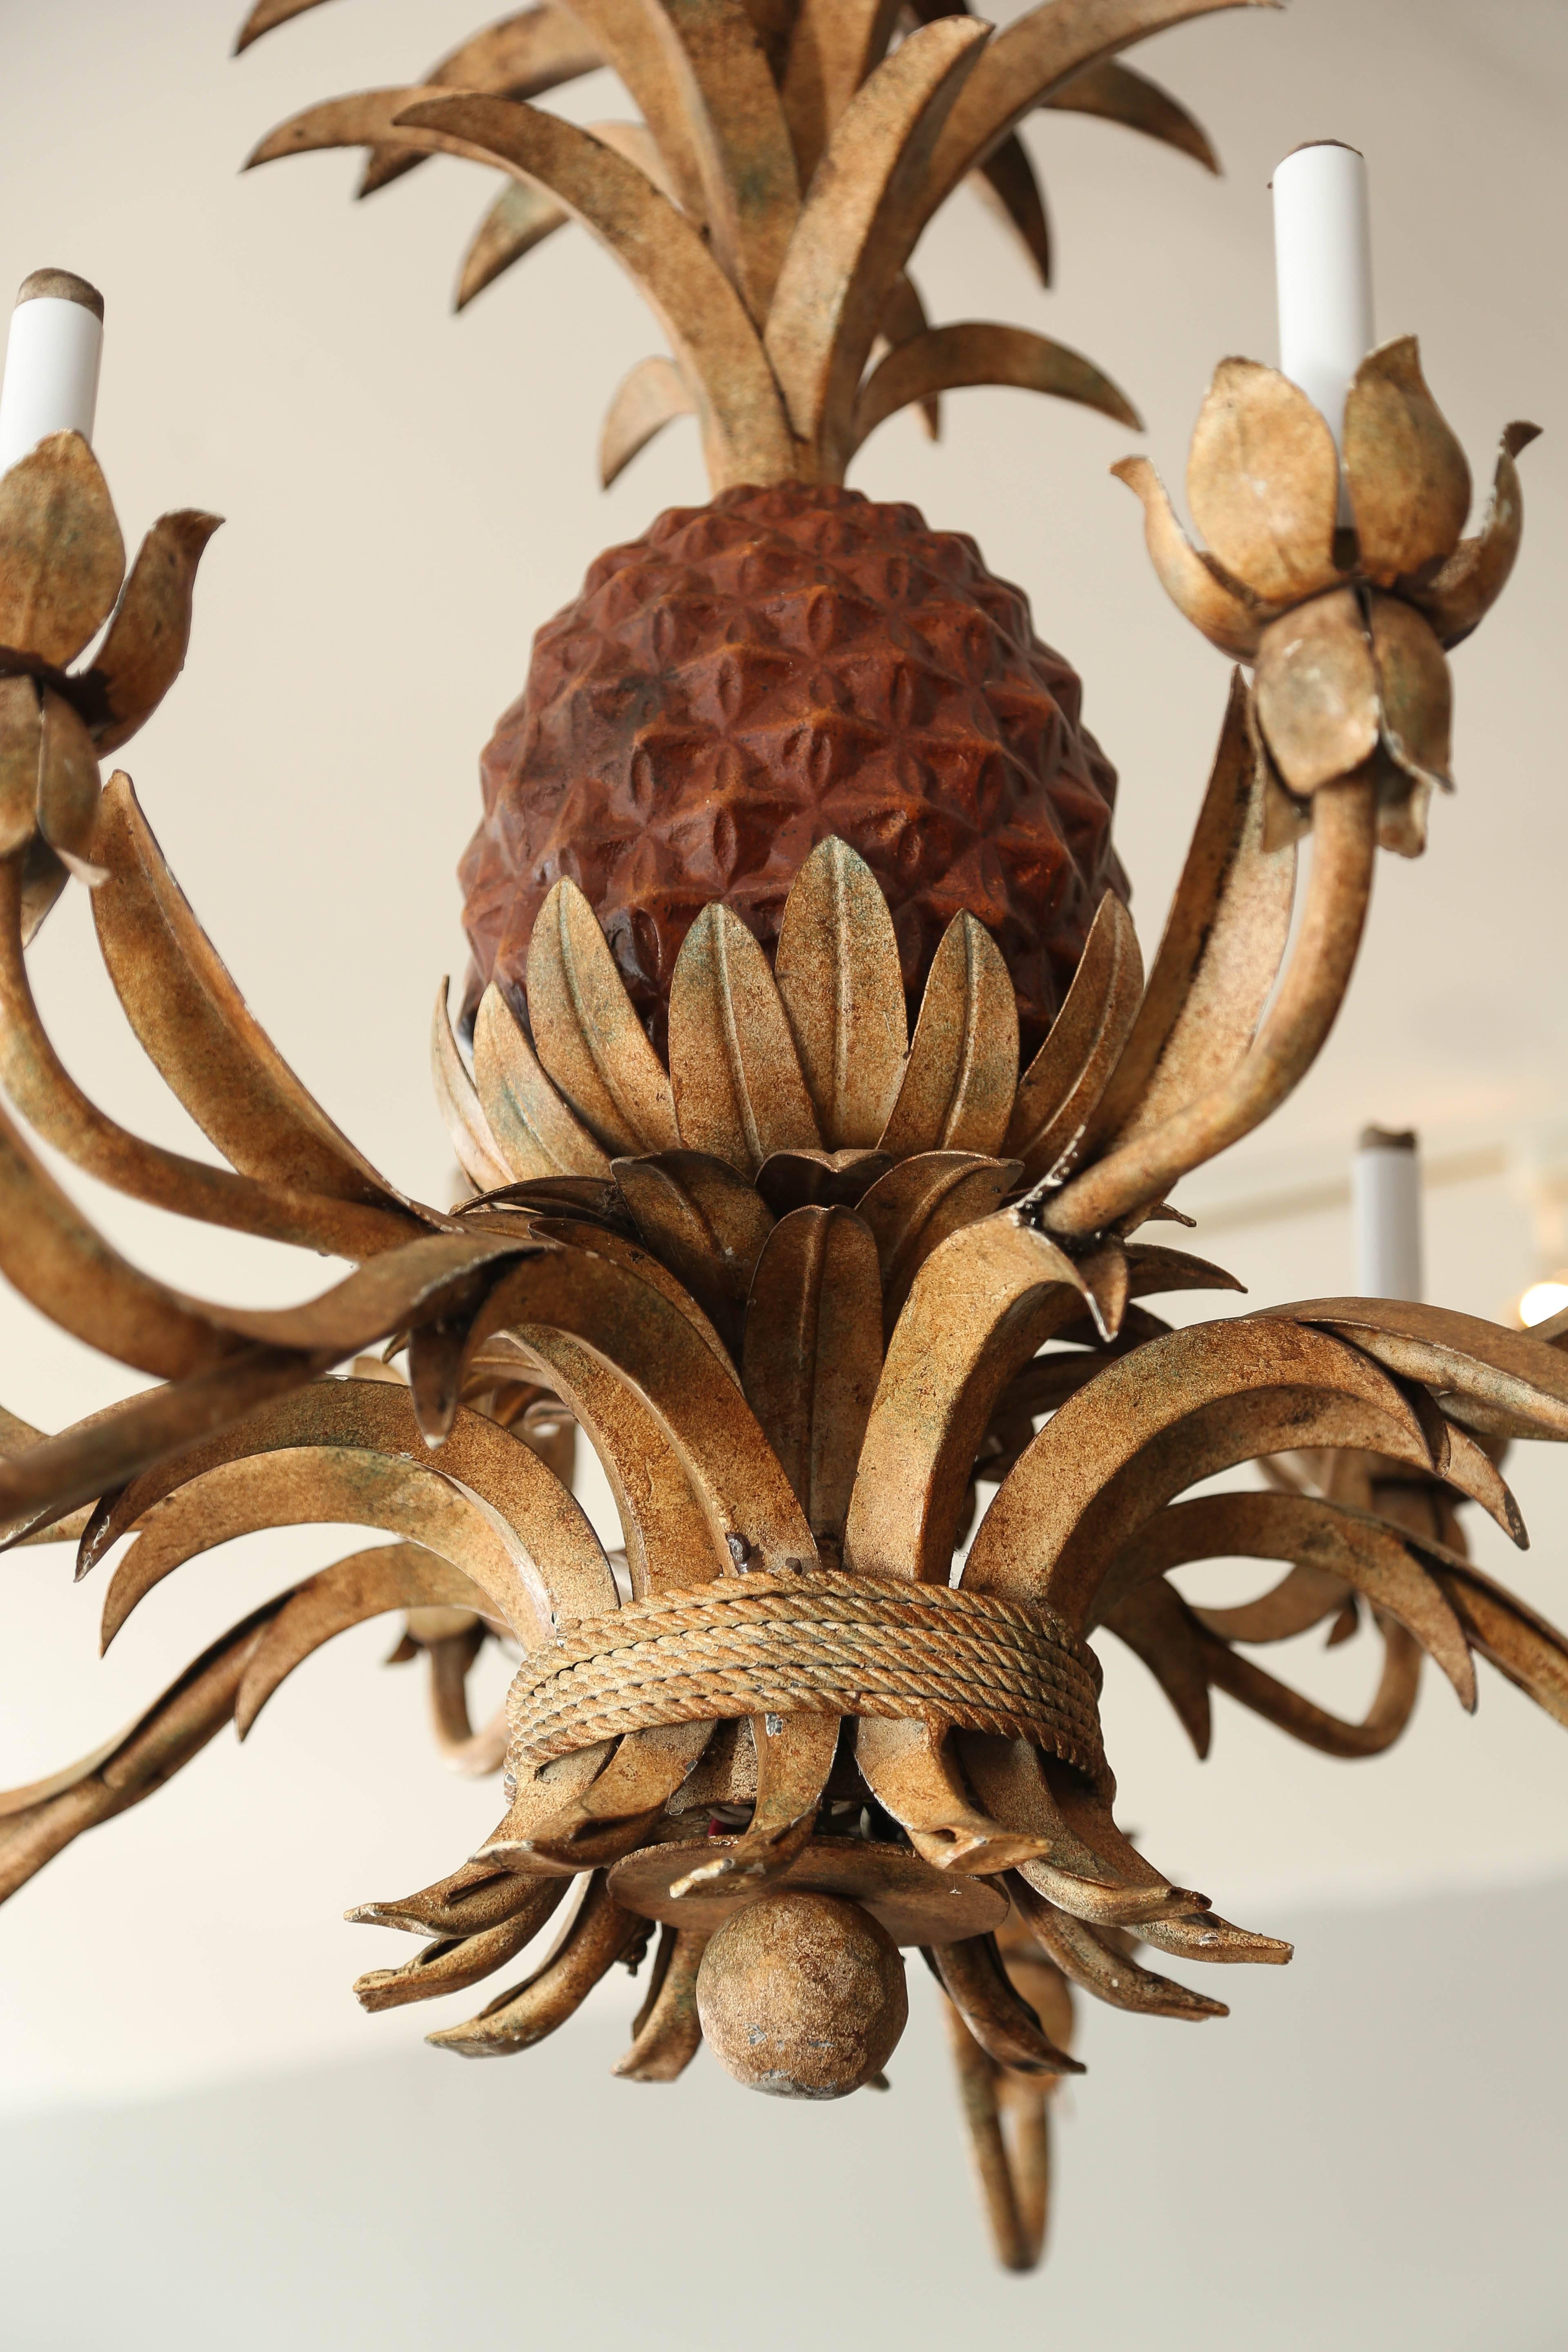 Magnificent twelve-light chandelier of generous proportions original paint.
The central pineapple is larger than lifesize and finely fashioned.